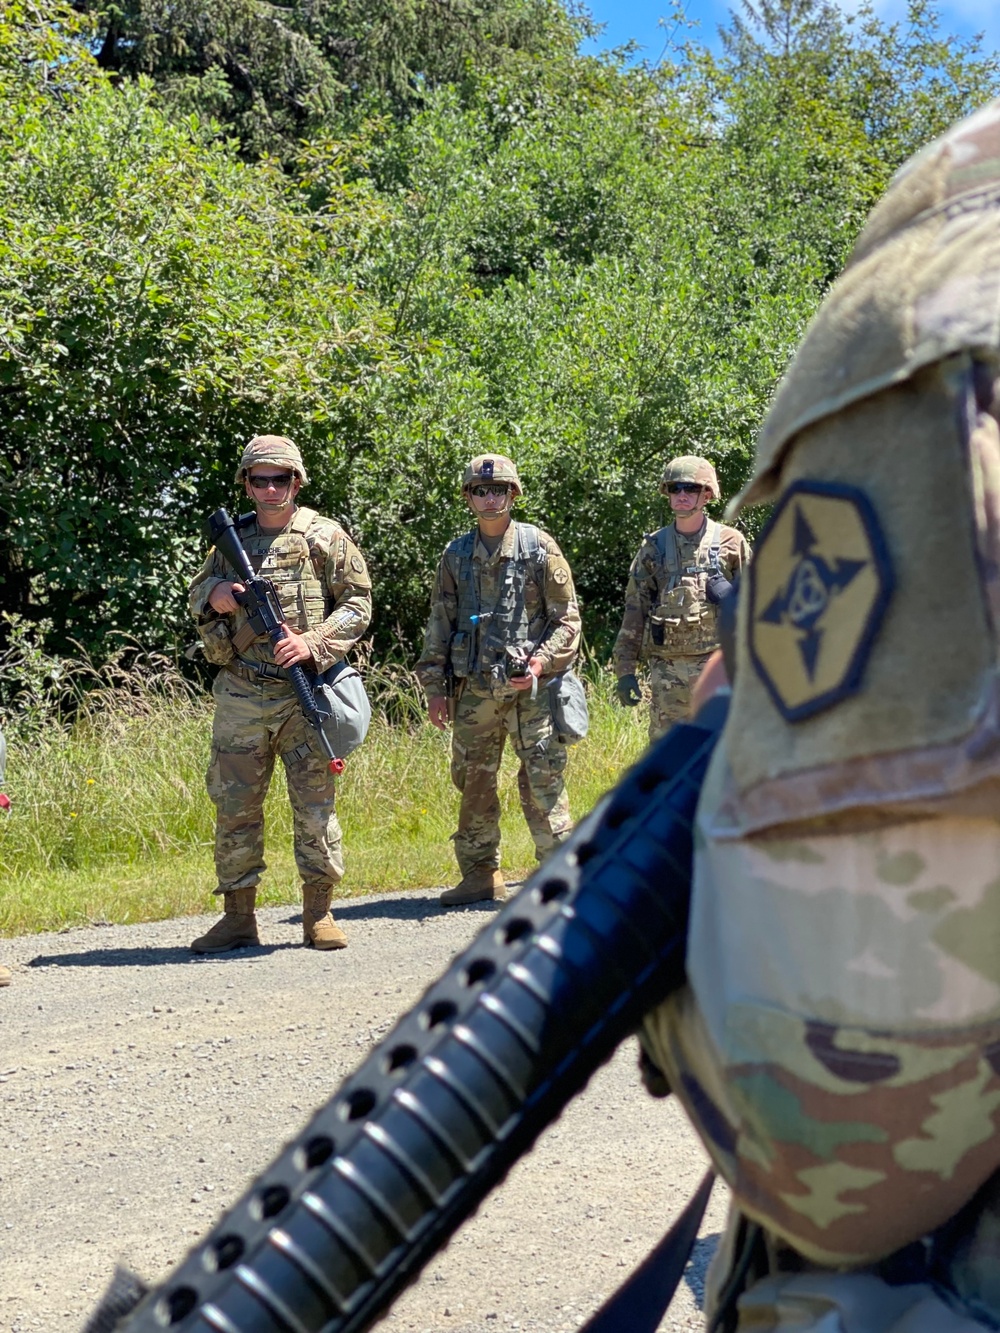 Troops step up to challenges at Annual Training